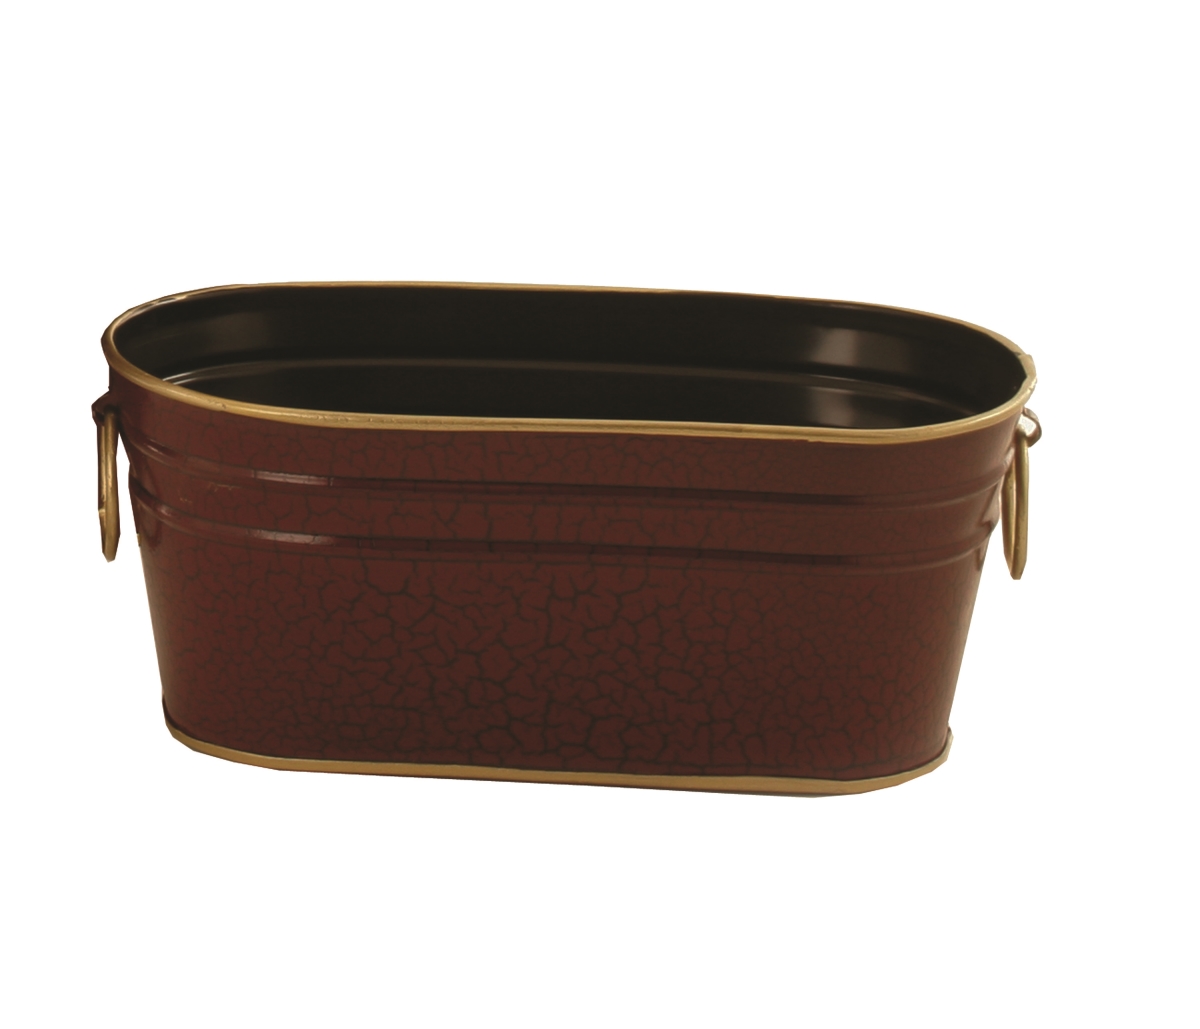 0830-9 9 In. Oval Metal Planter